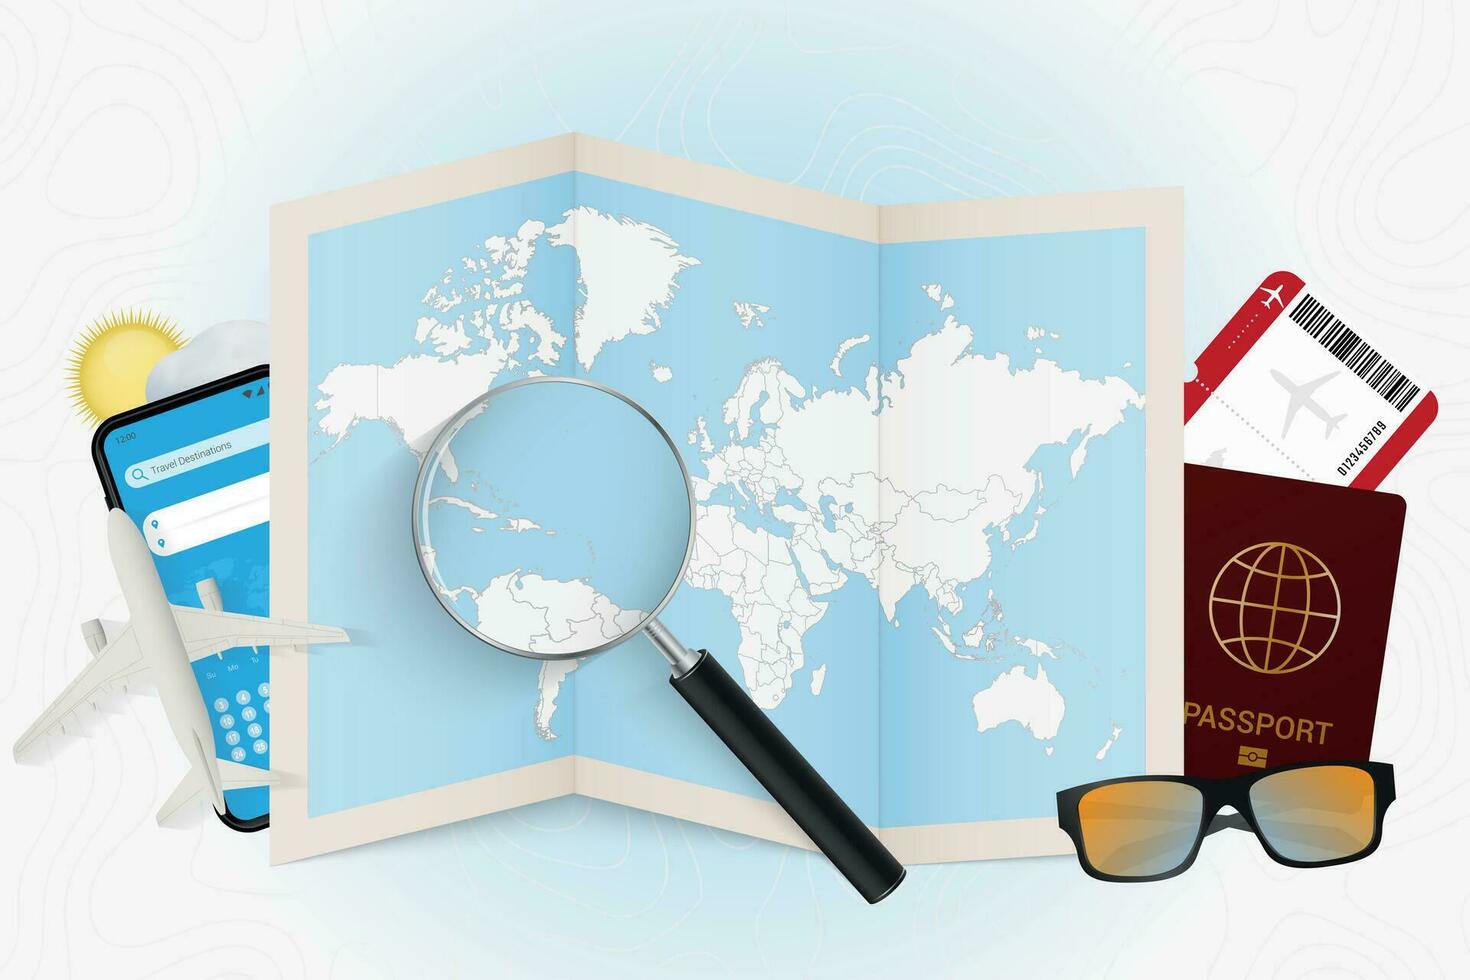 Travel destination Puerto Rico, tourism mockup with travel equipment and world map with magnifying glass on a Puerto Rico. vector